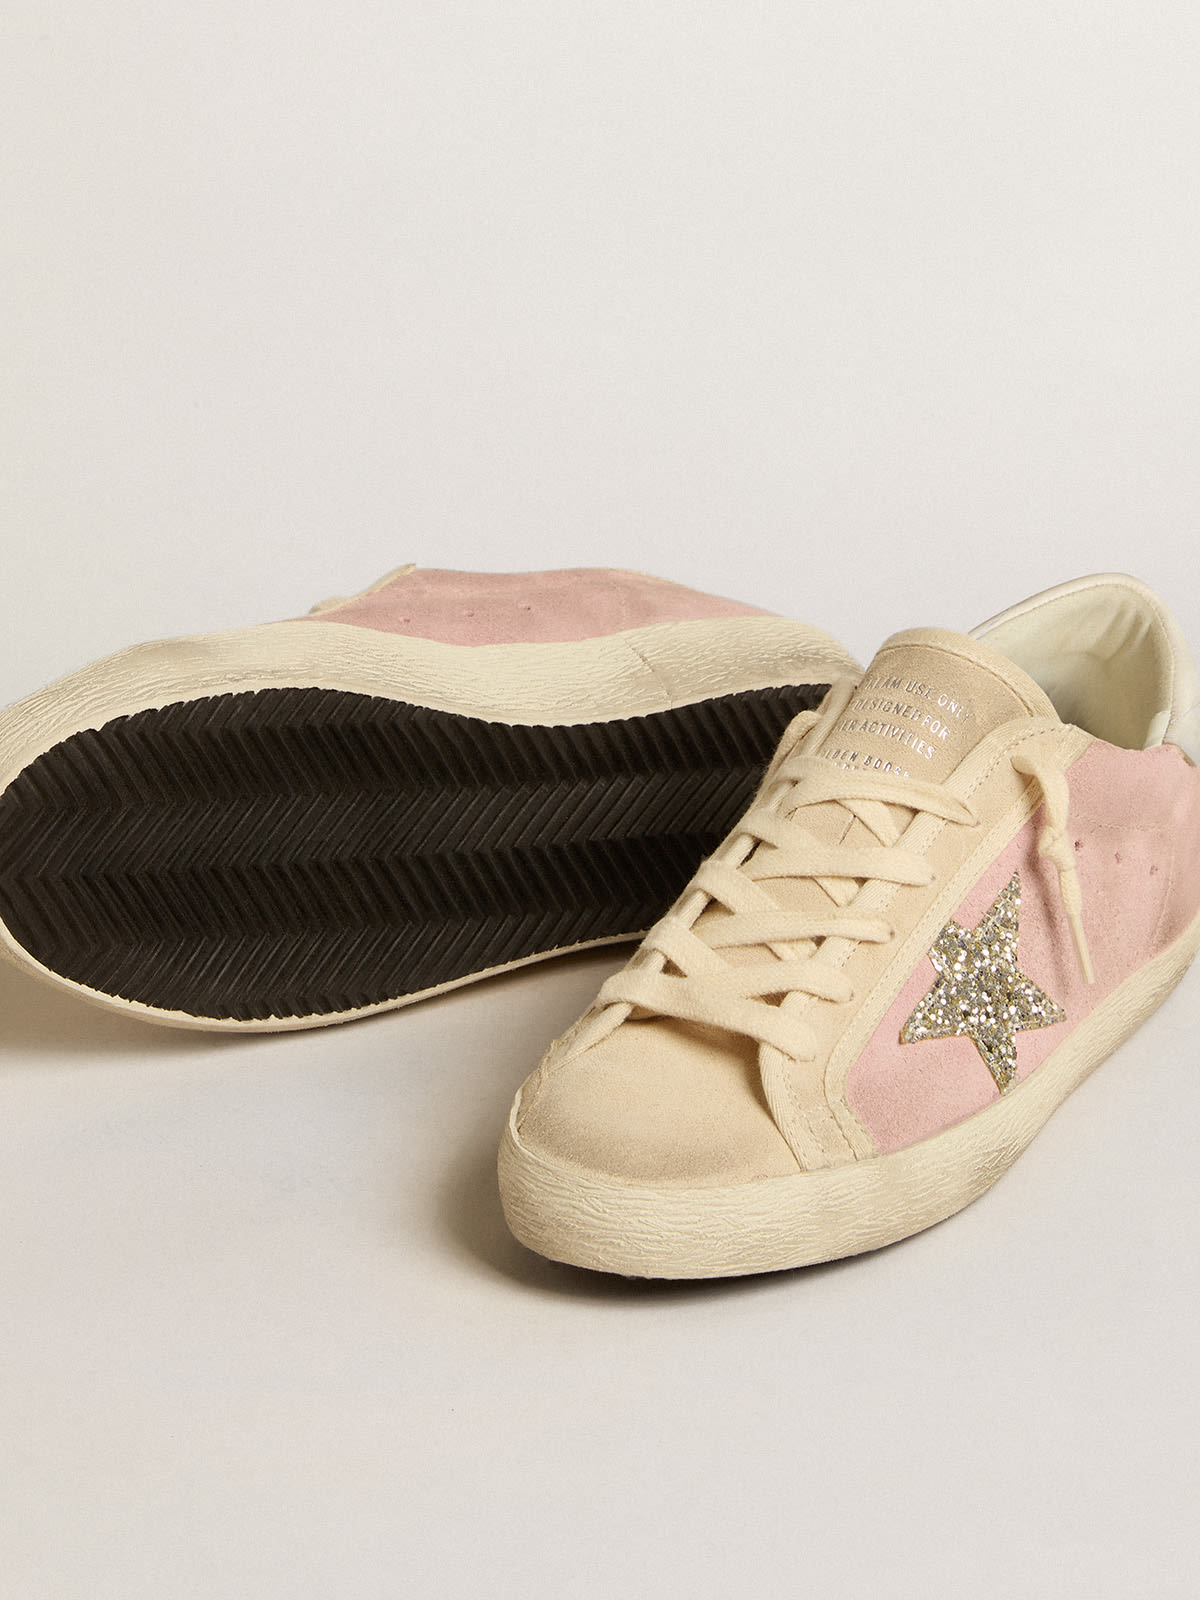 Golden Goose - Super-Star LTD in pink and pearl suede with platinum glitter star in 